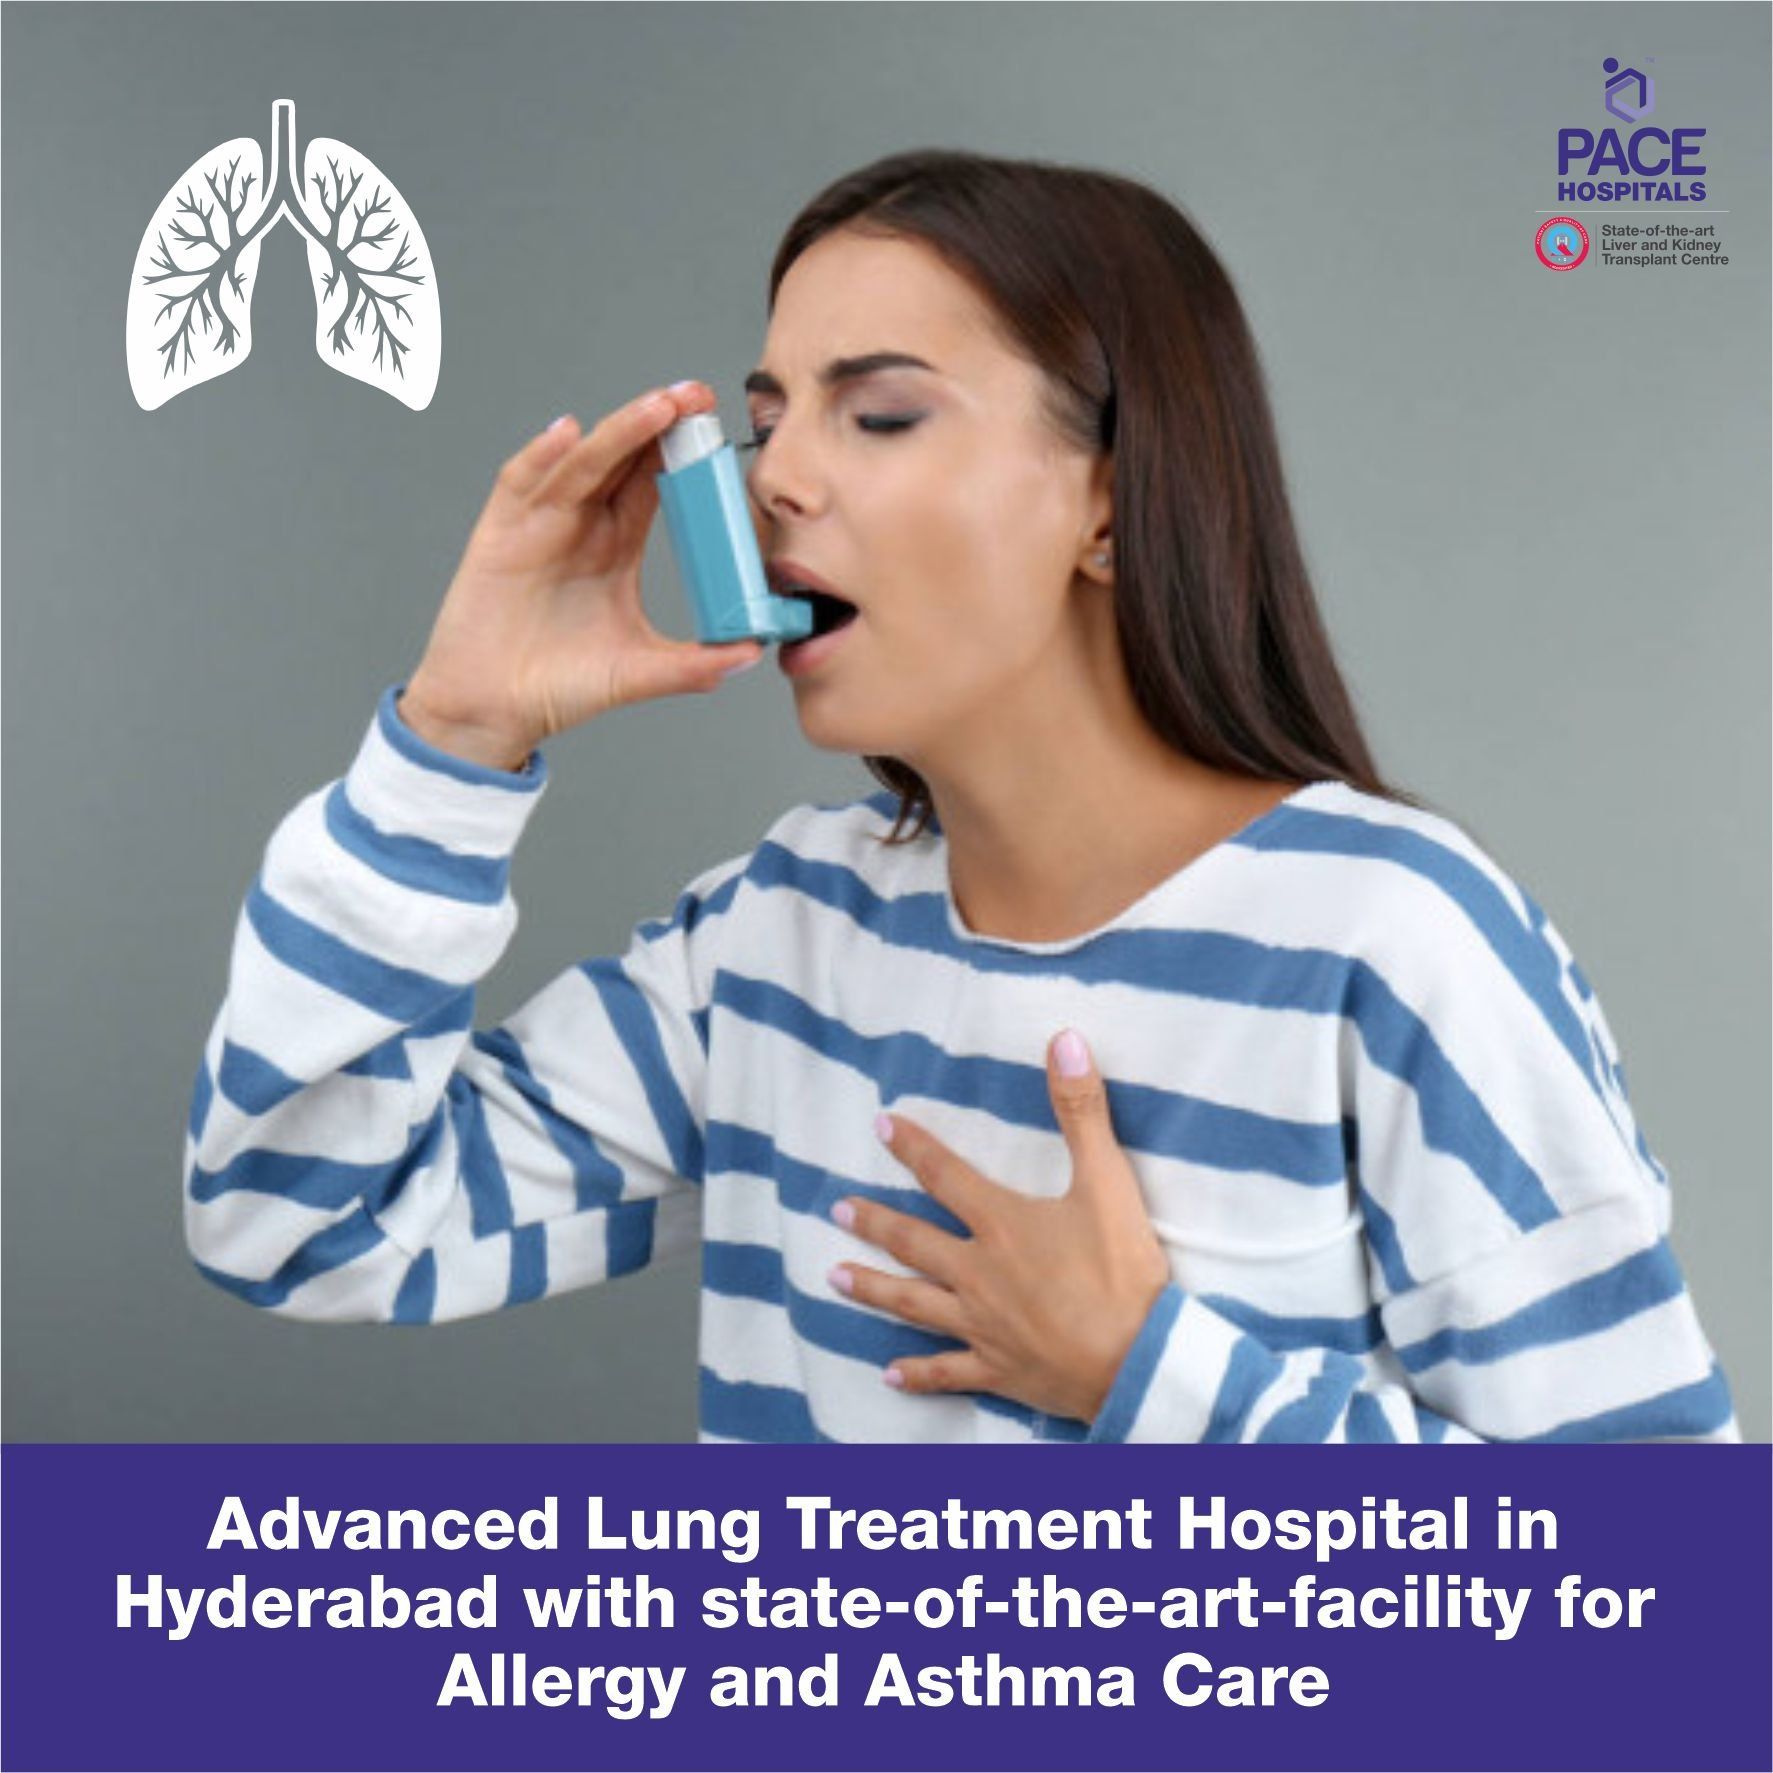 Advanced Lung Treatment Hospital in Hyderabad for Allergy and Asthma Care